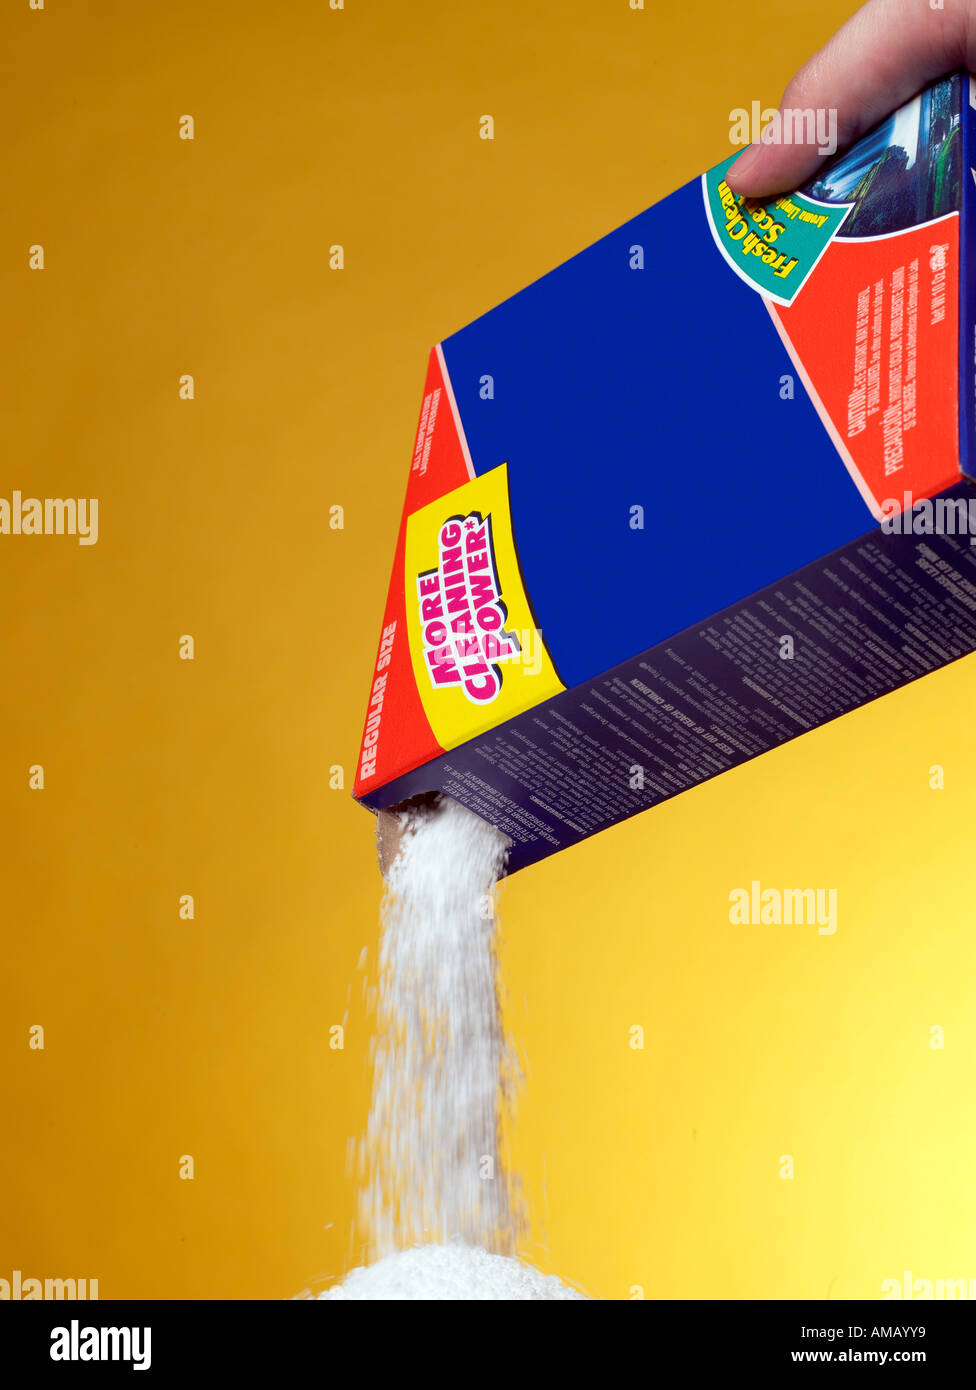 Pouring Detergent vertical Stock Photo